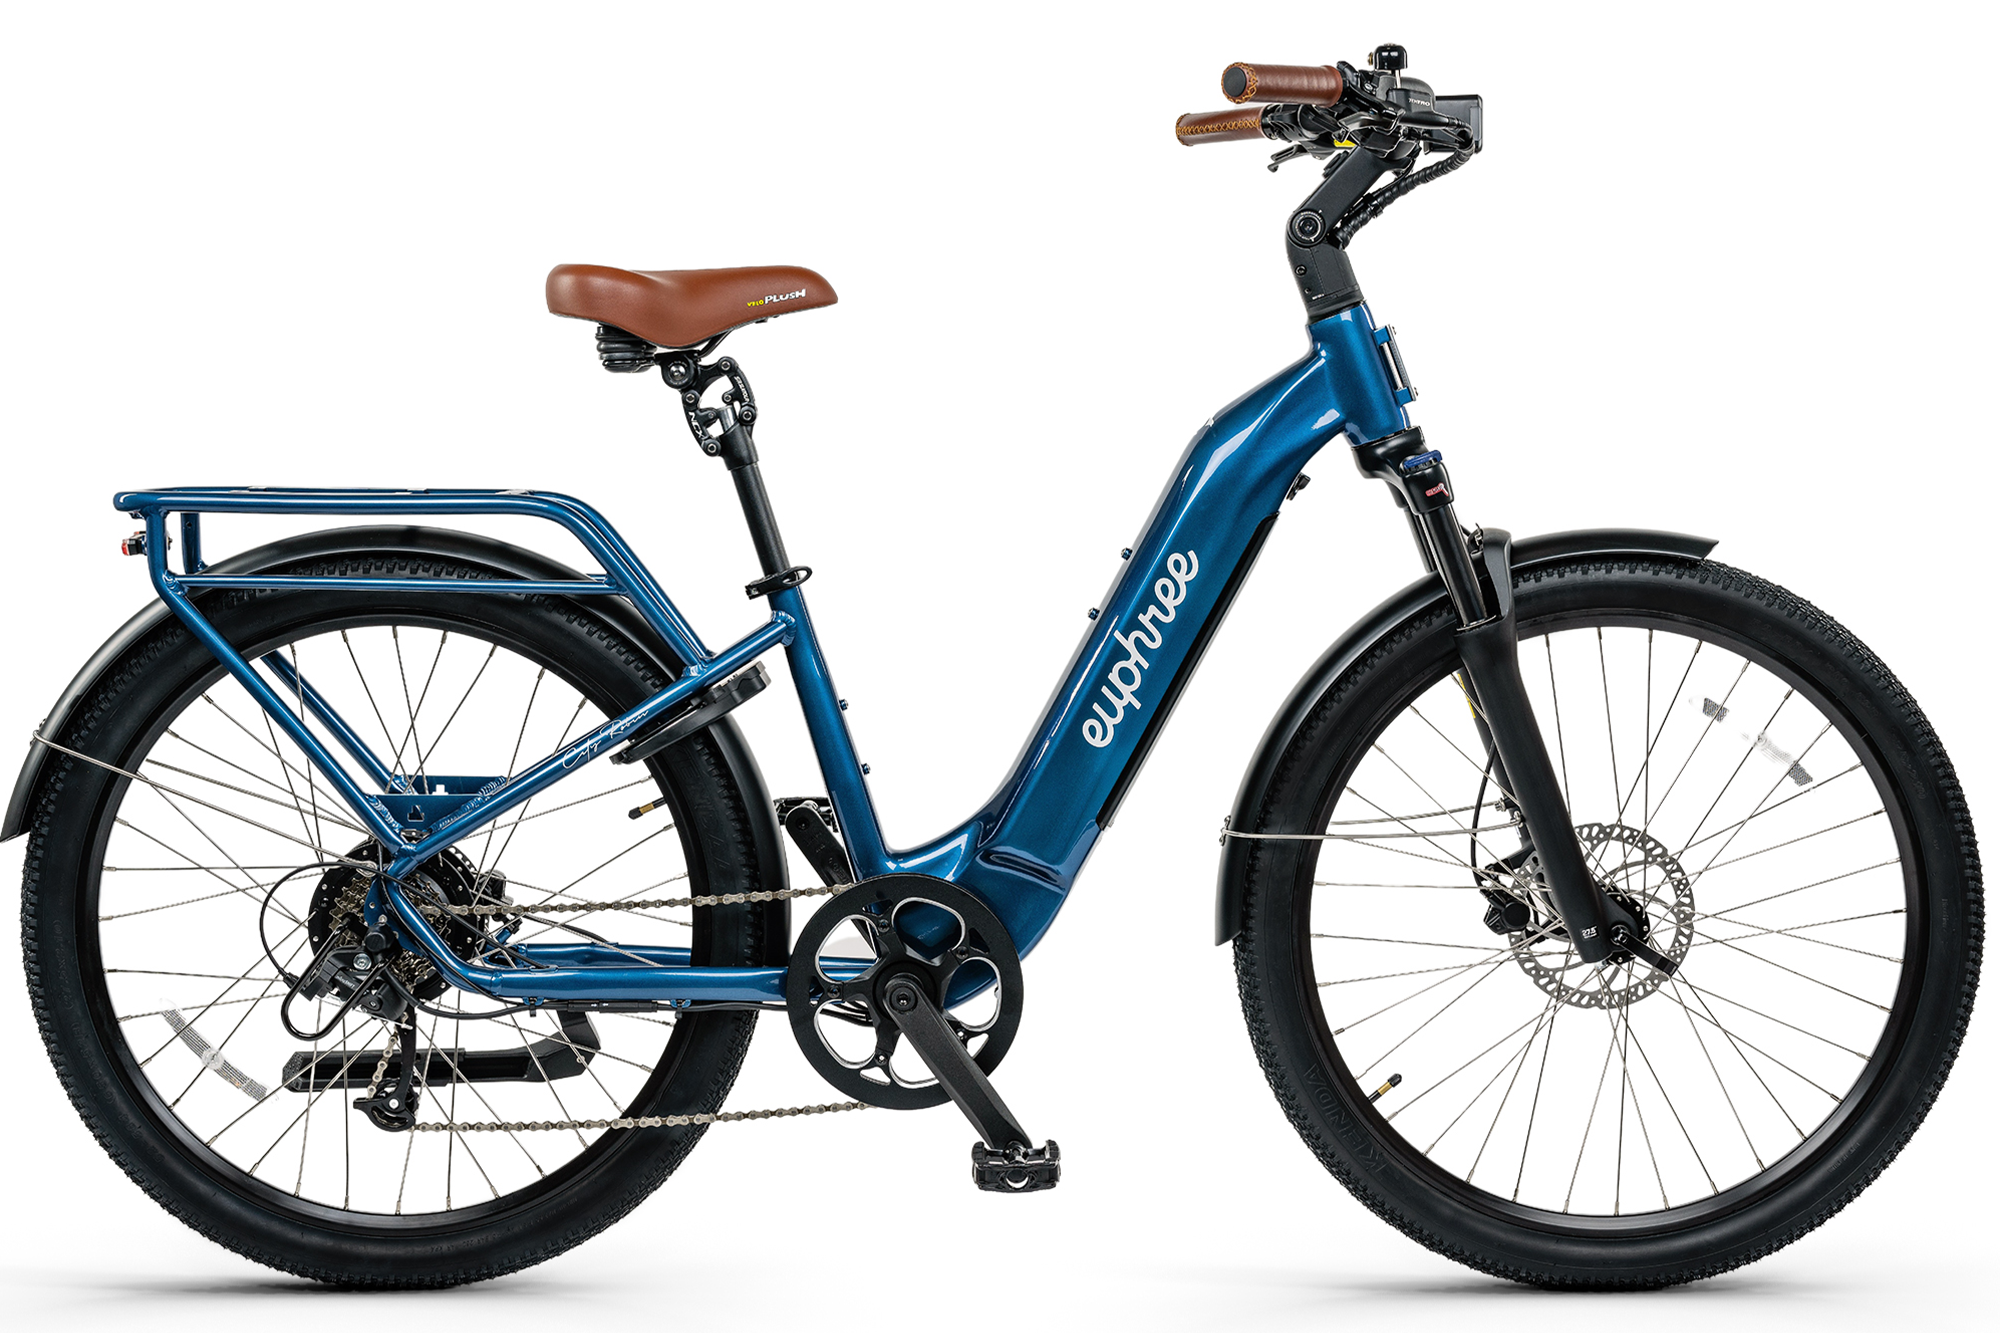 This is an image of the City Robin X+ electric bike by Euphree. The bike is shown in a vibrant shade of Rebel Blue, a rich and dynamic hue that adds a touch of style and elegance. The bike features a step-through frame design, providing ease of use for a wide range of riders. The frame houses the fully integrated wires, creating a sleek and clutter-free appearance.